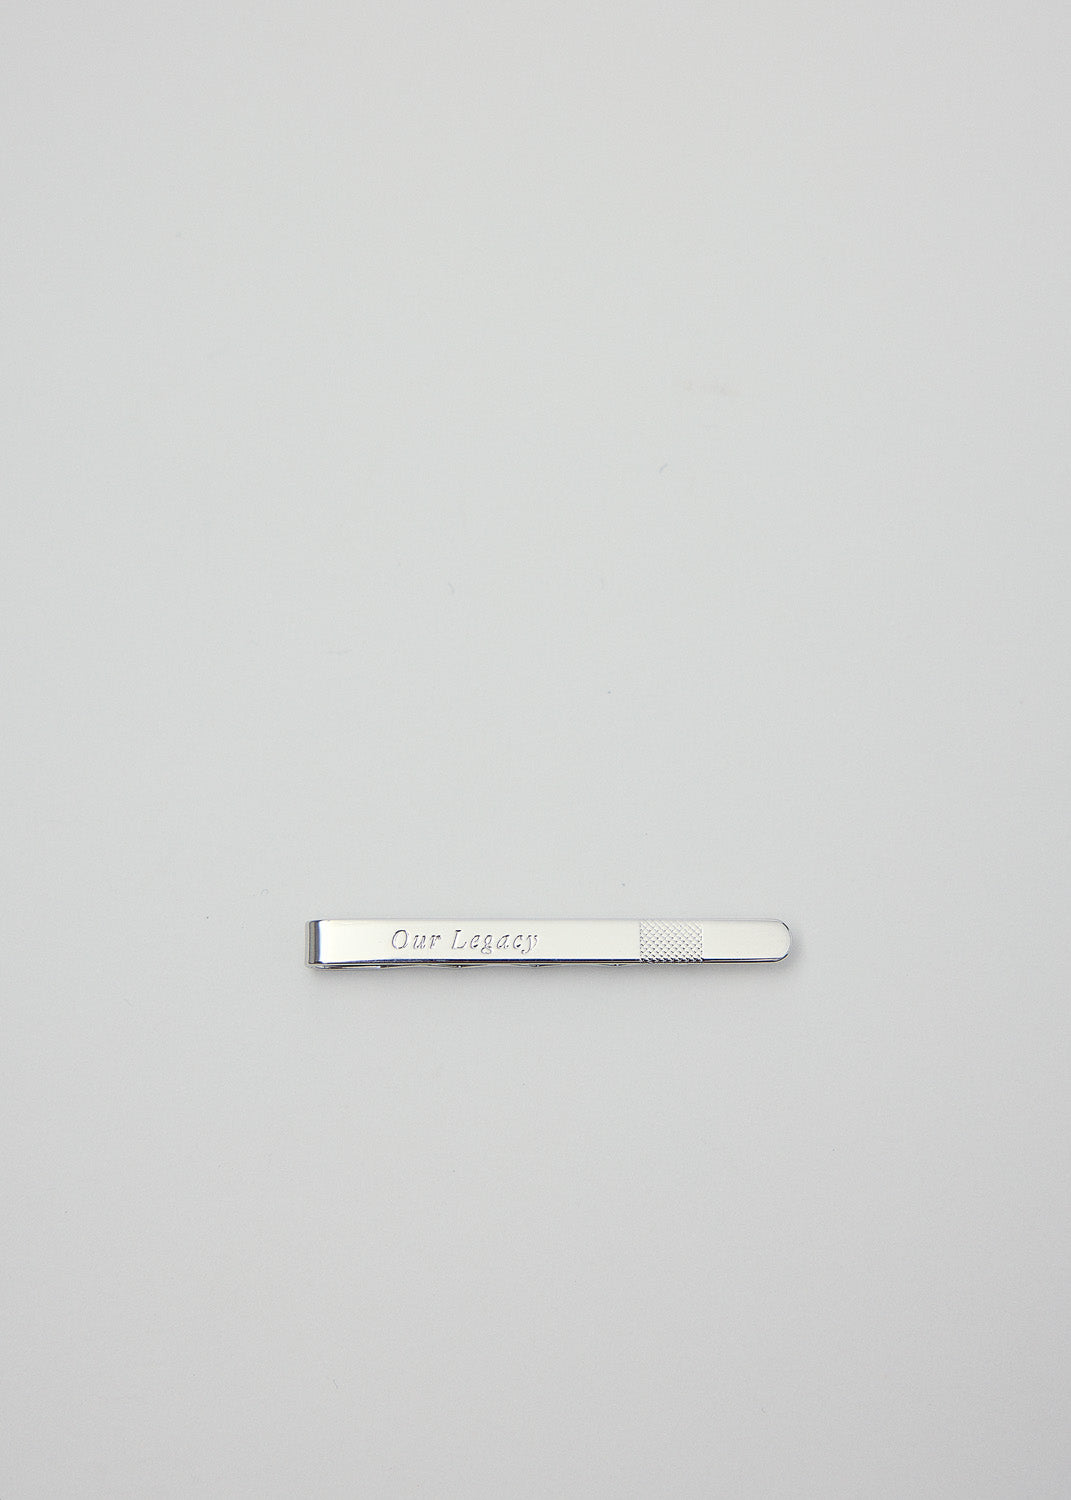 Our Legacy - Silver Tie Pin | 1032 SPACE